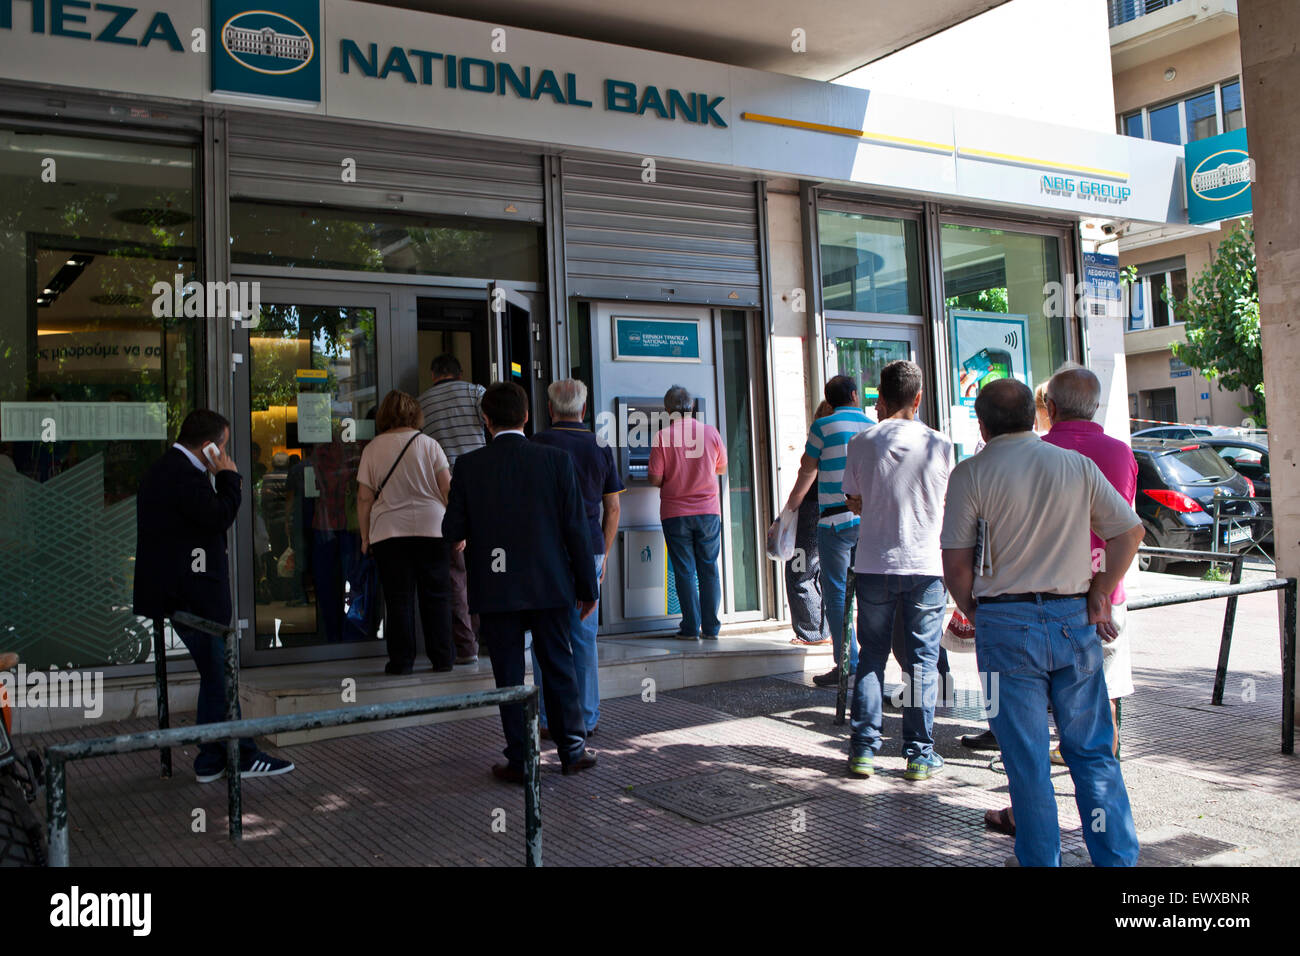 Athens, Greece. 2nd July, 2015. National Bank of Greece queues amid the Bank capital controls in Athens, Greece. Credit:  Martin Garnham/Alamy Live News Stock Photo